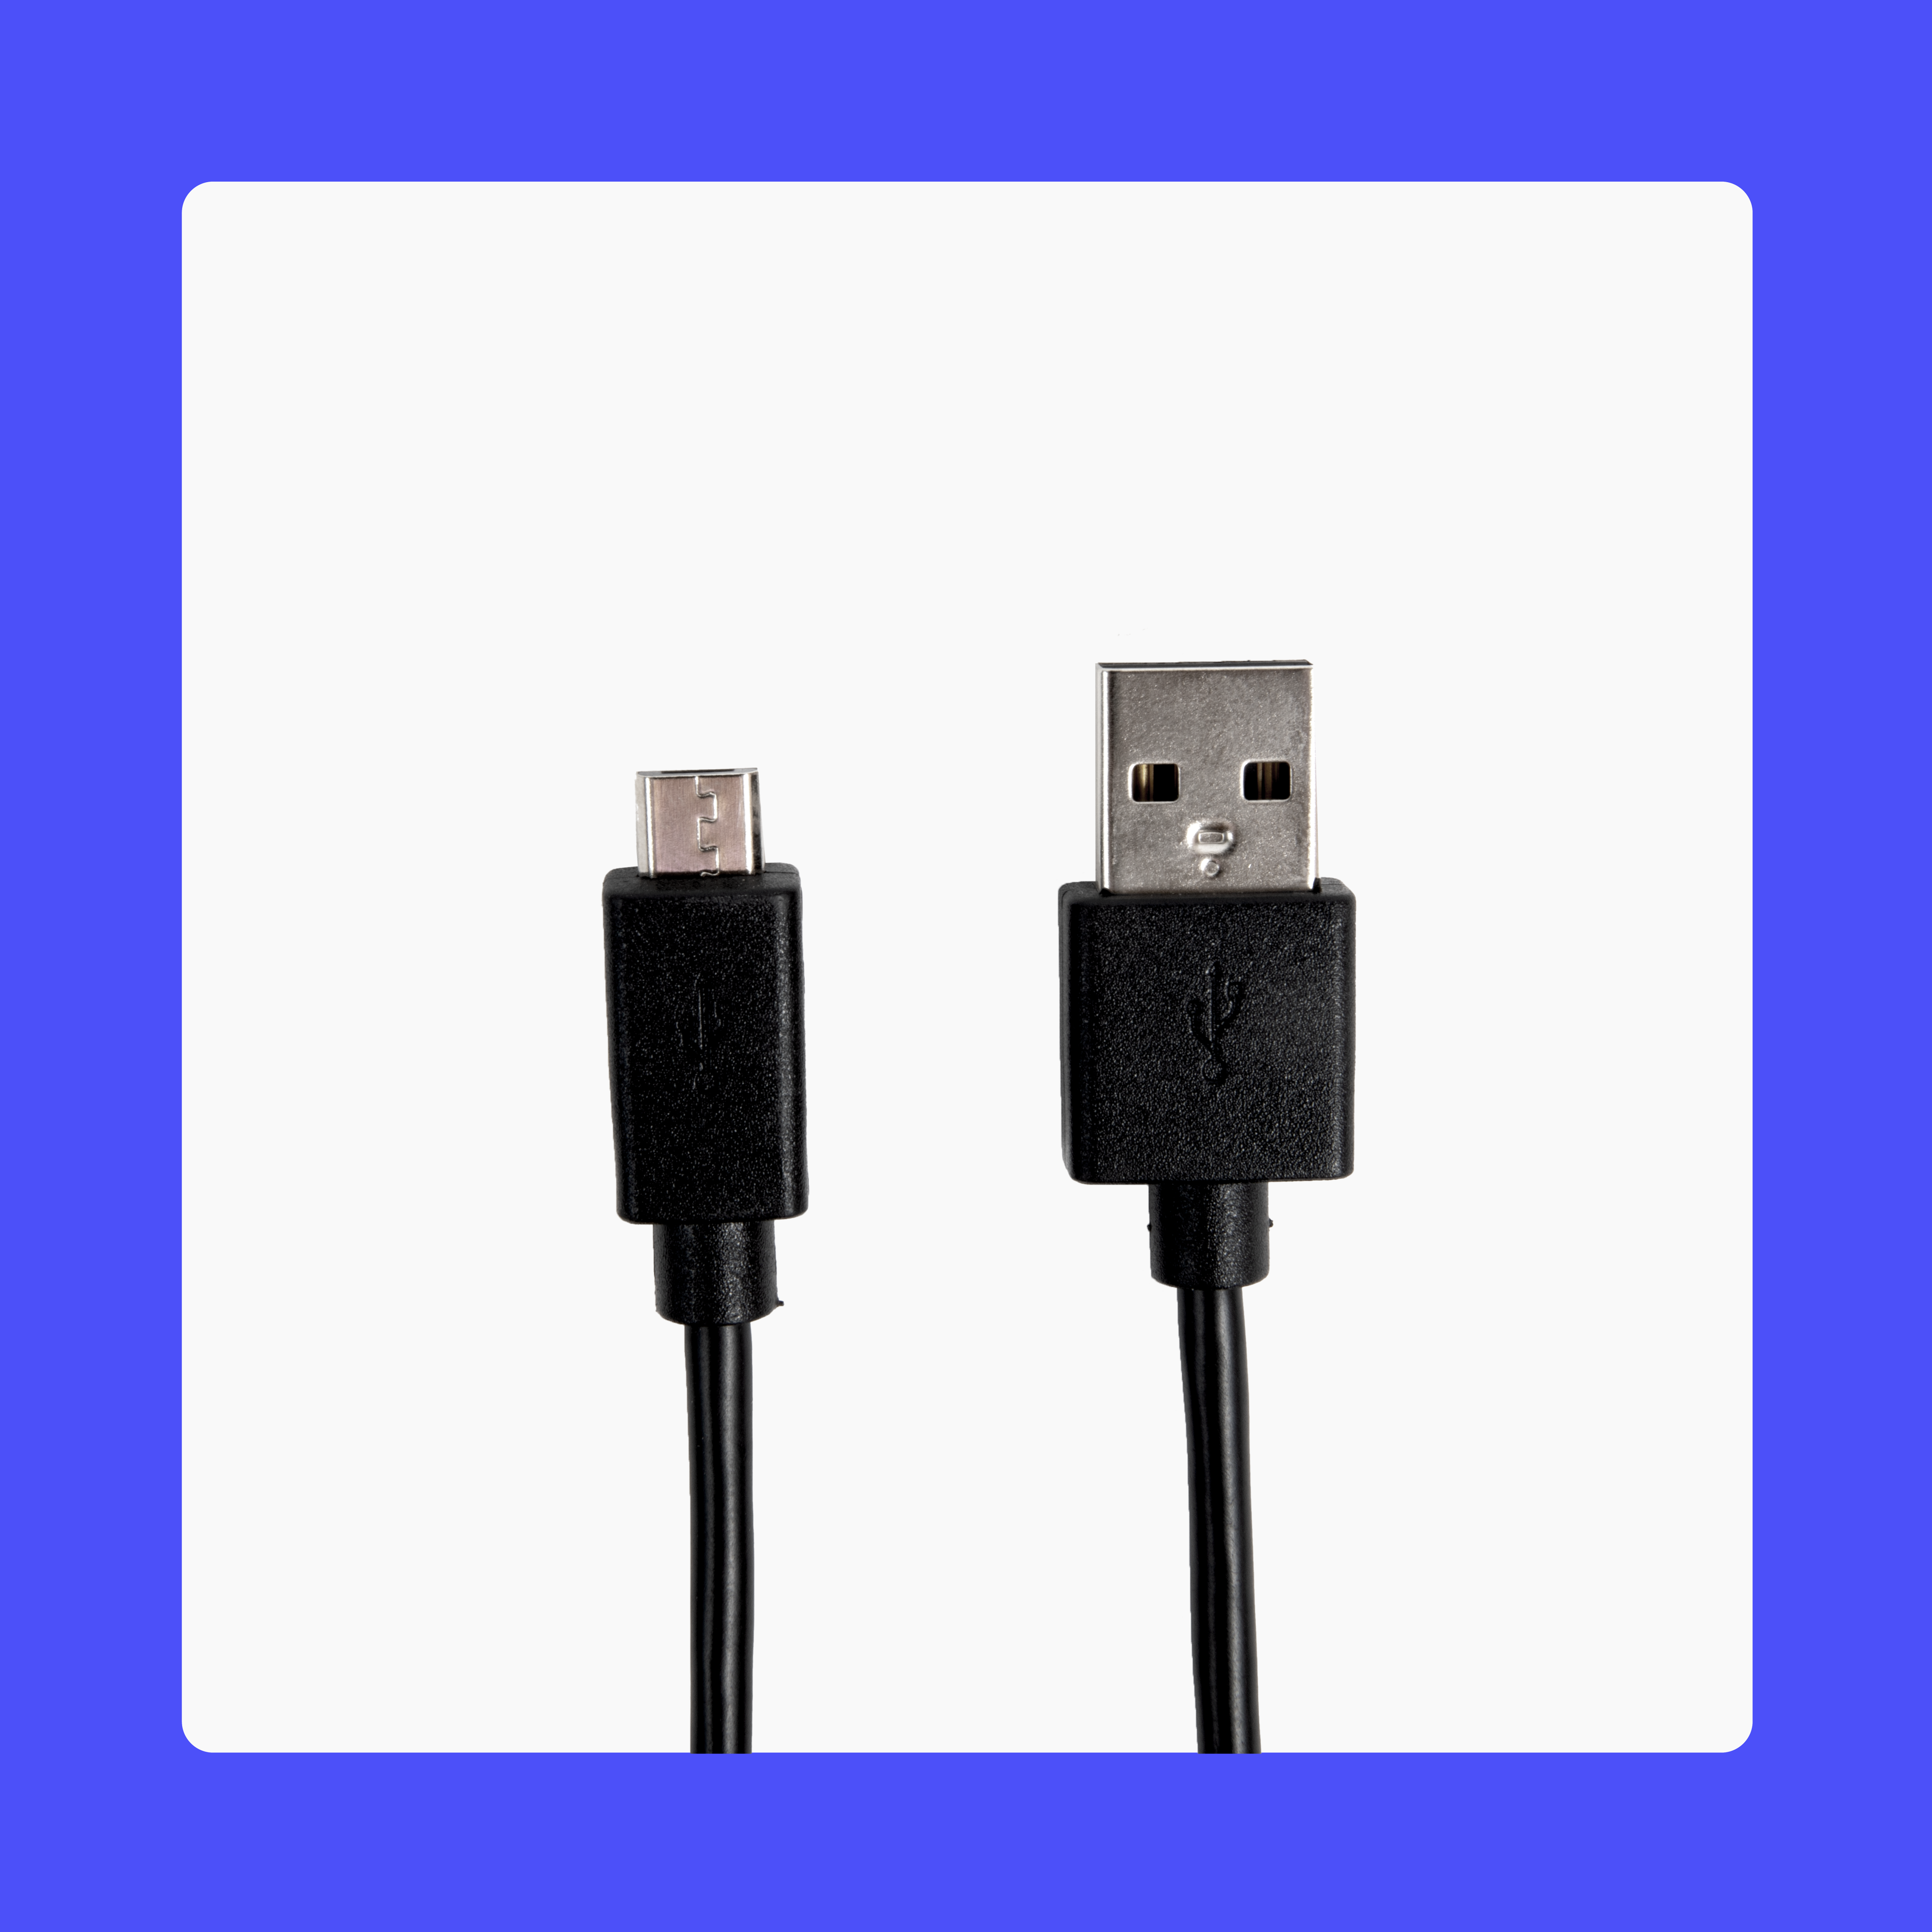 product | accessory | replacement 6' micro usb | purple background